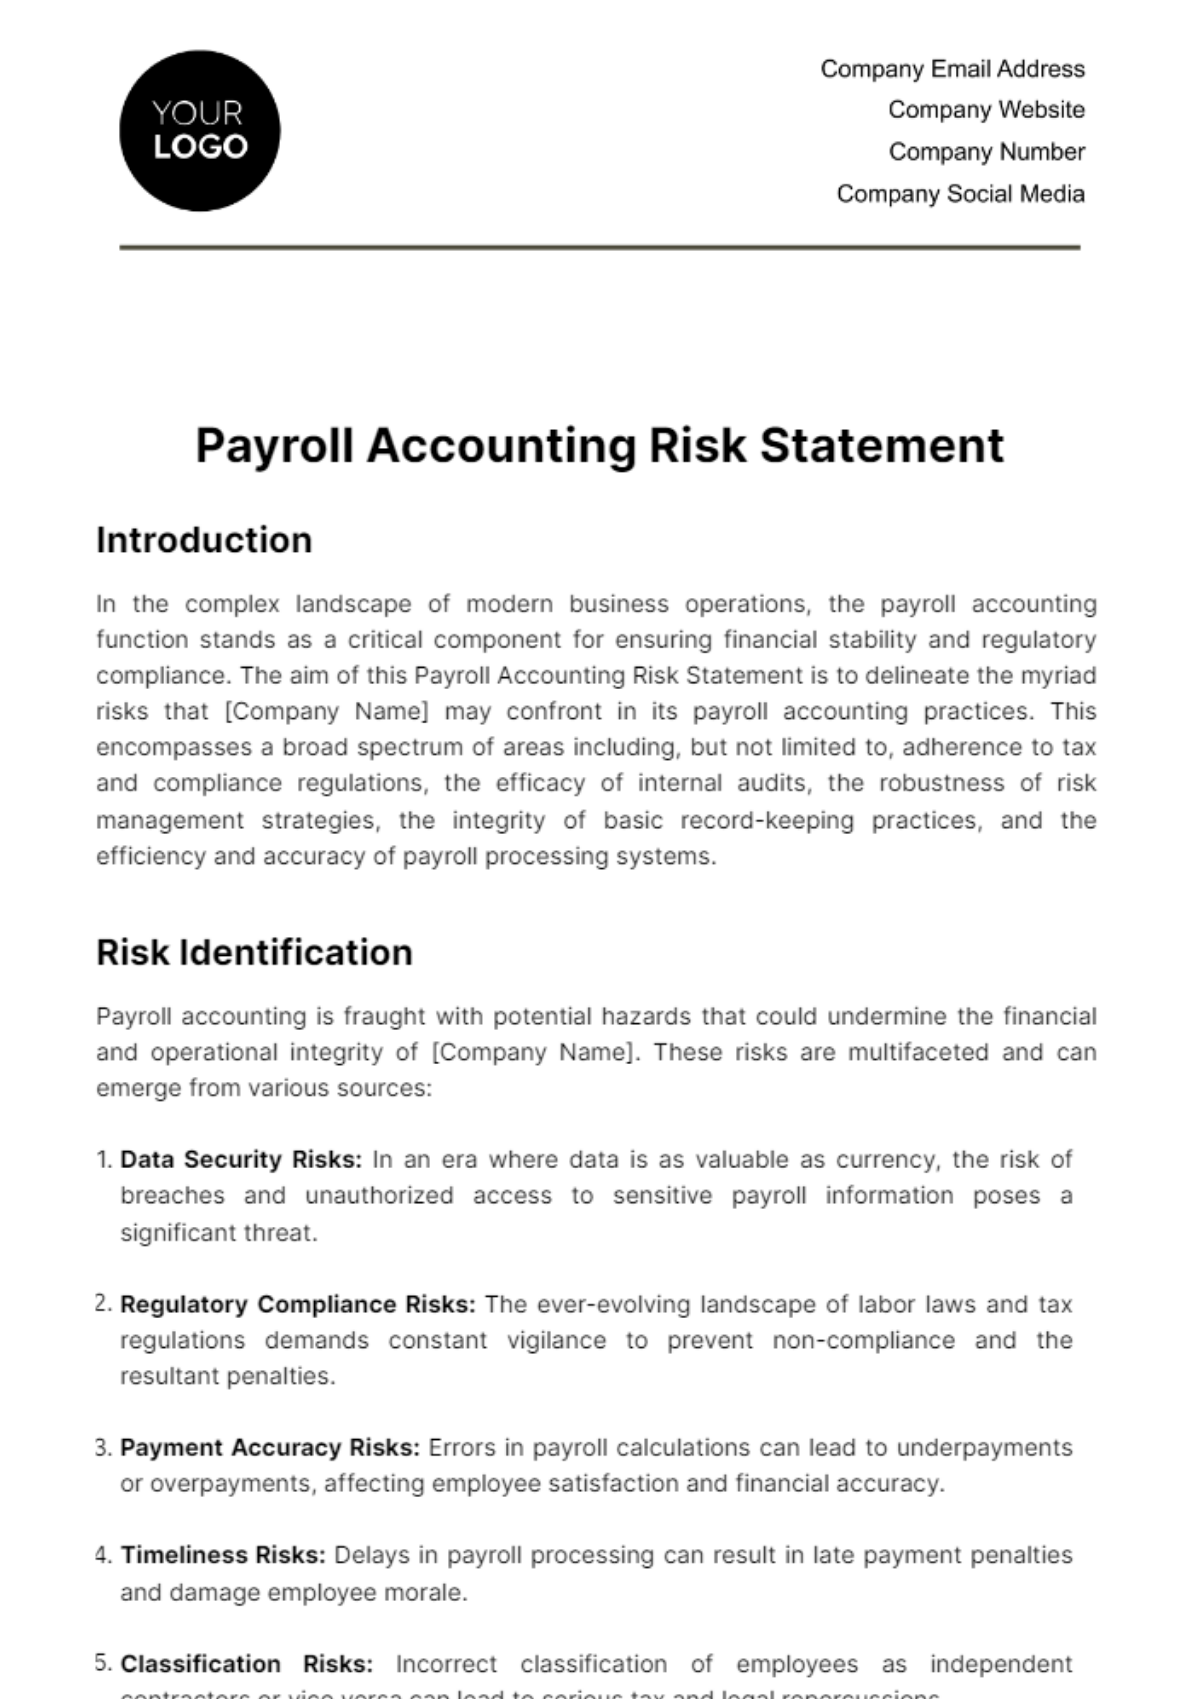 Payroll Accounting Risk Statement Template